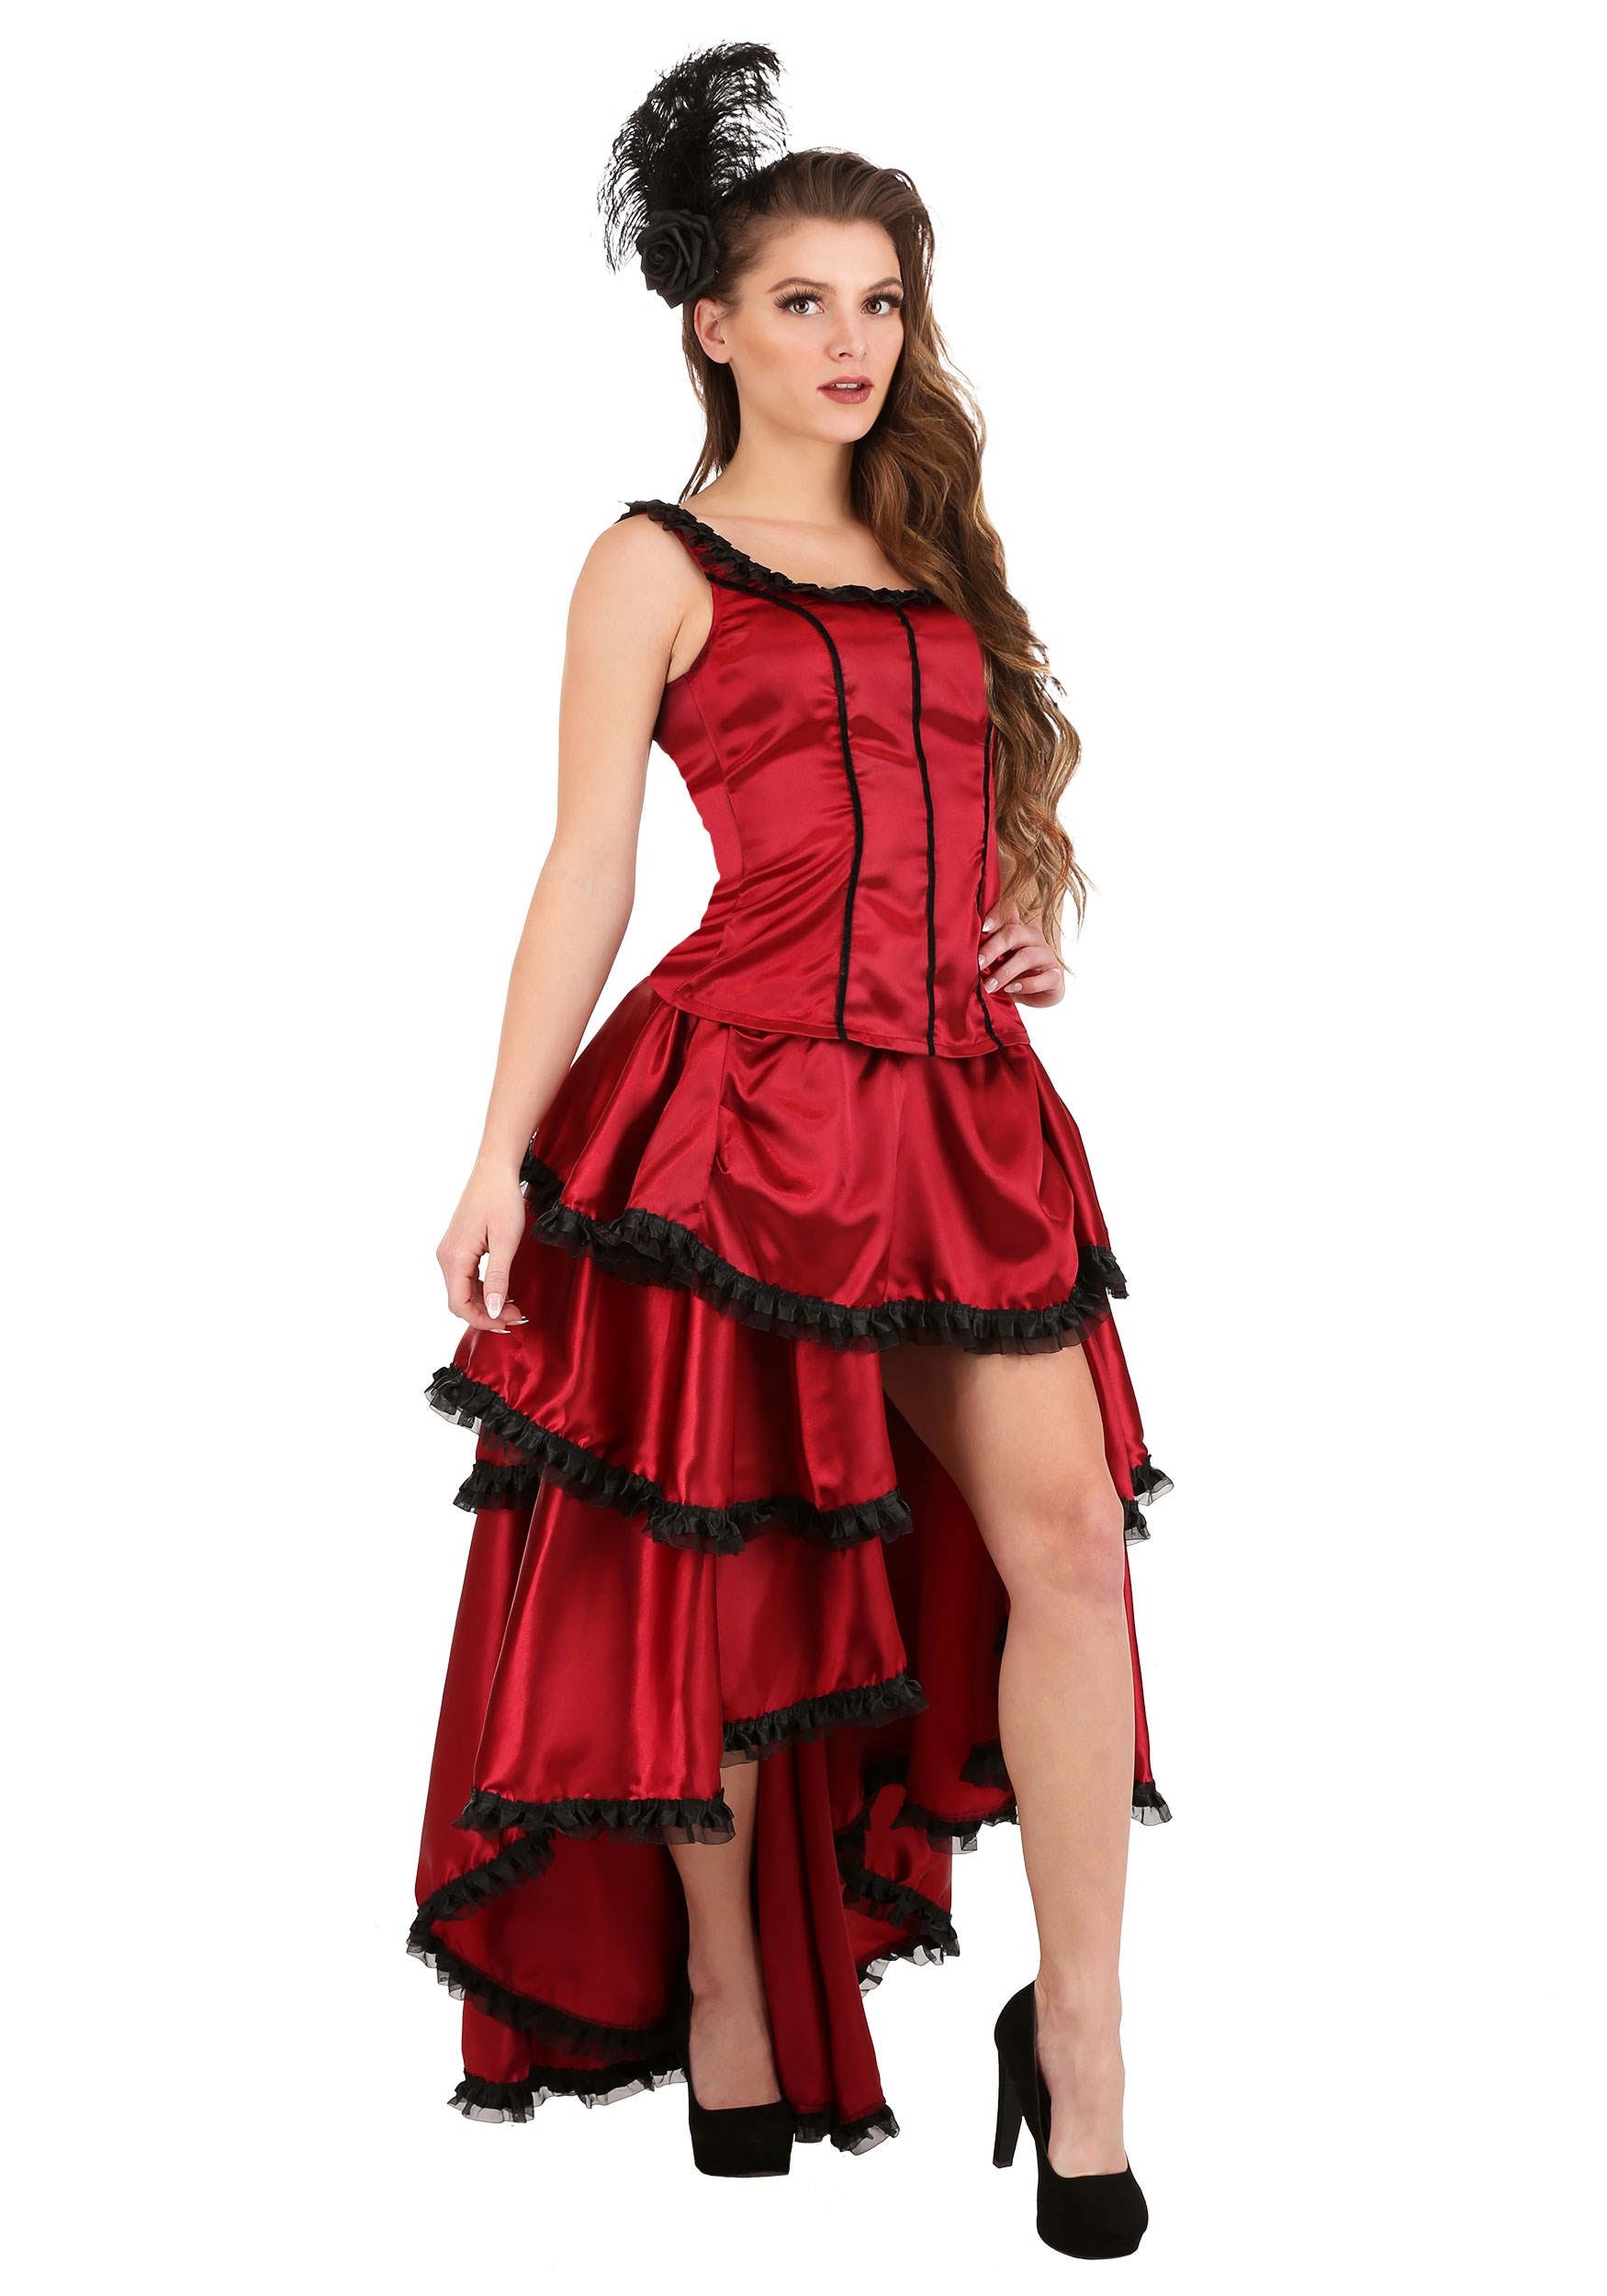 Sultry Saloon Girl Womens Costume